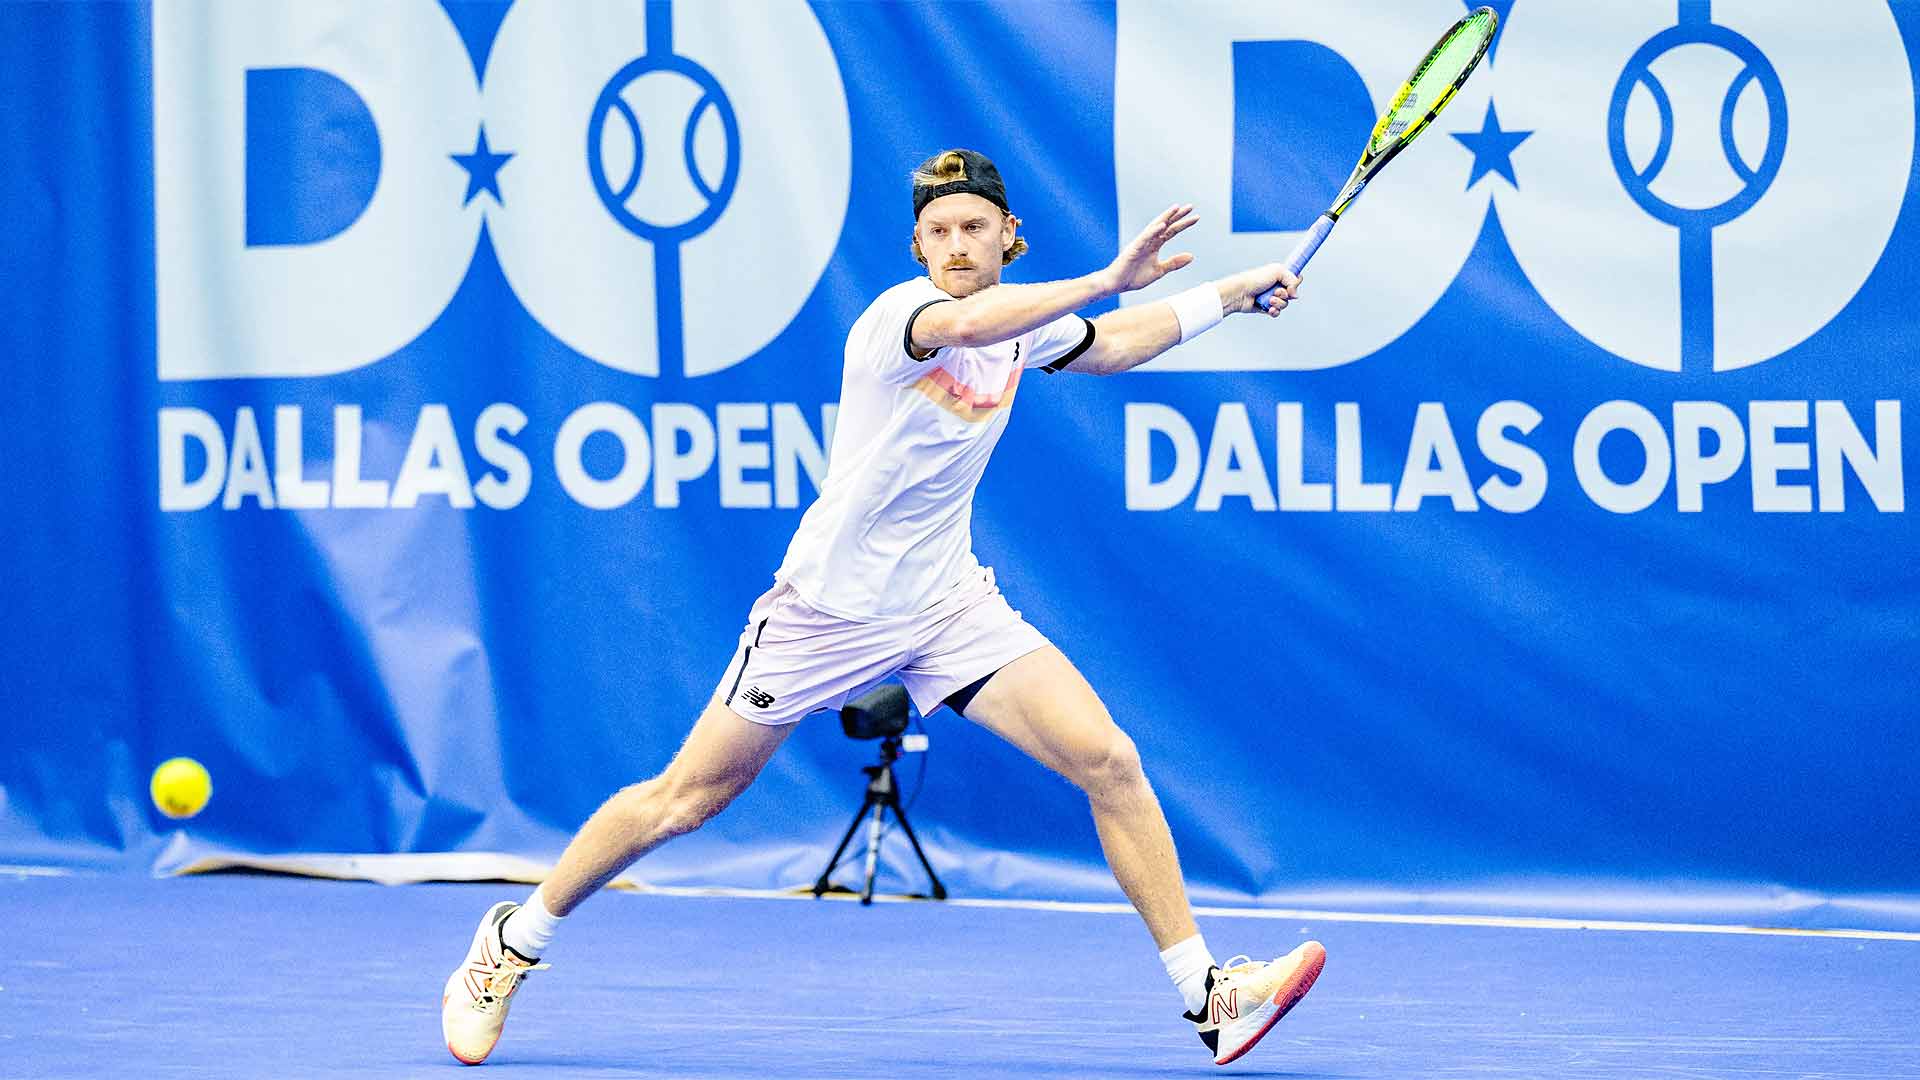 Behind The Mullet & Mustache, Rybakov’s Game On The Rise | Sports Opinion